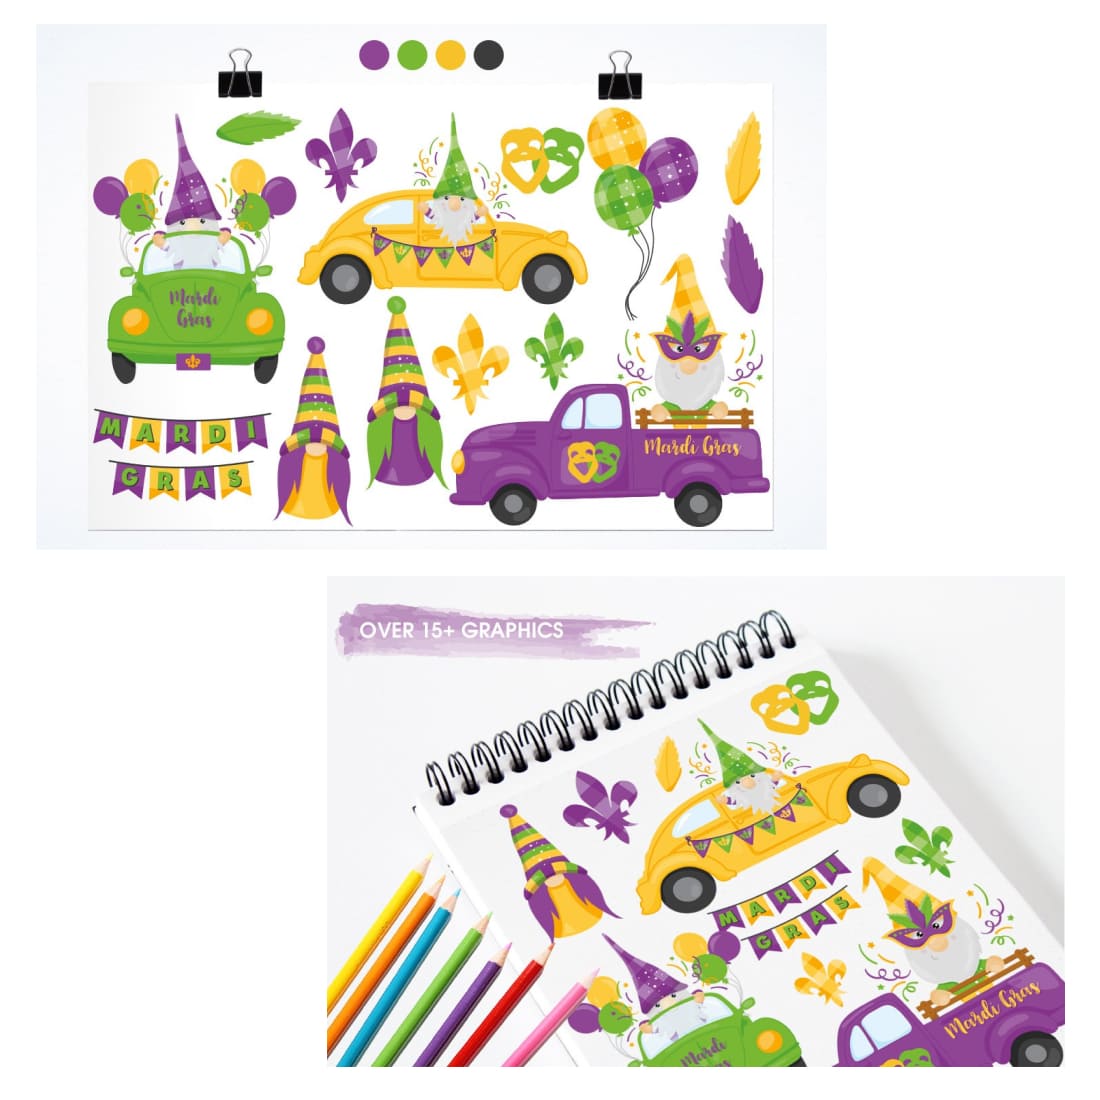 Mardi Gras gnomes are drawn on a notepad with a spring.